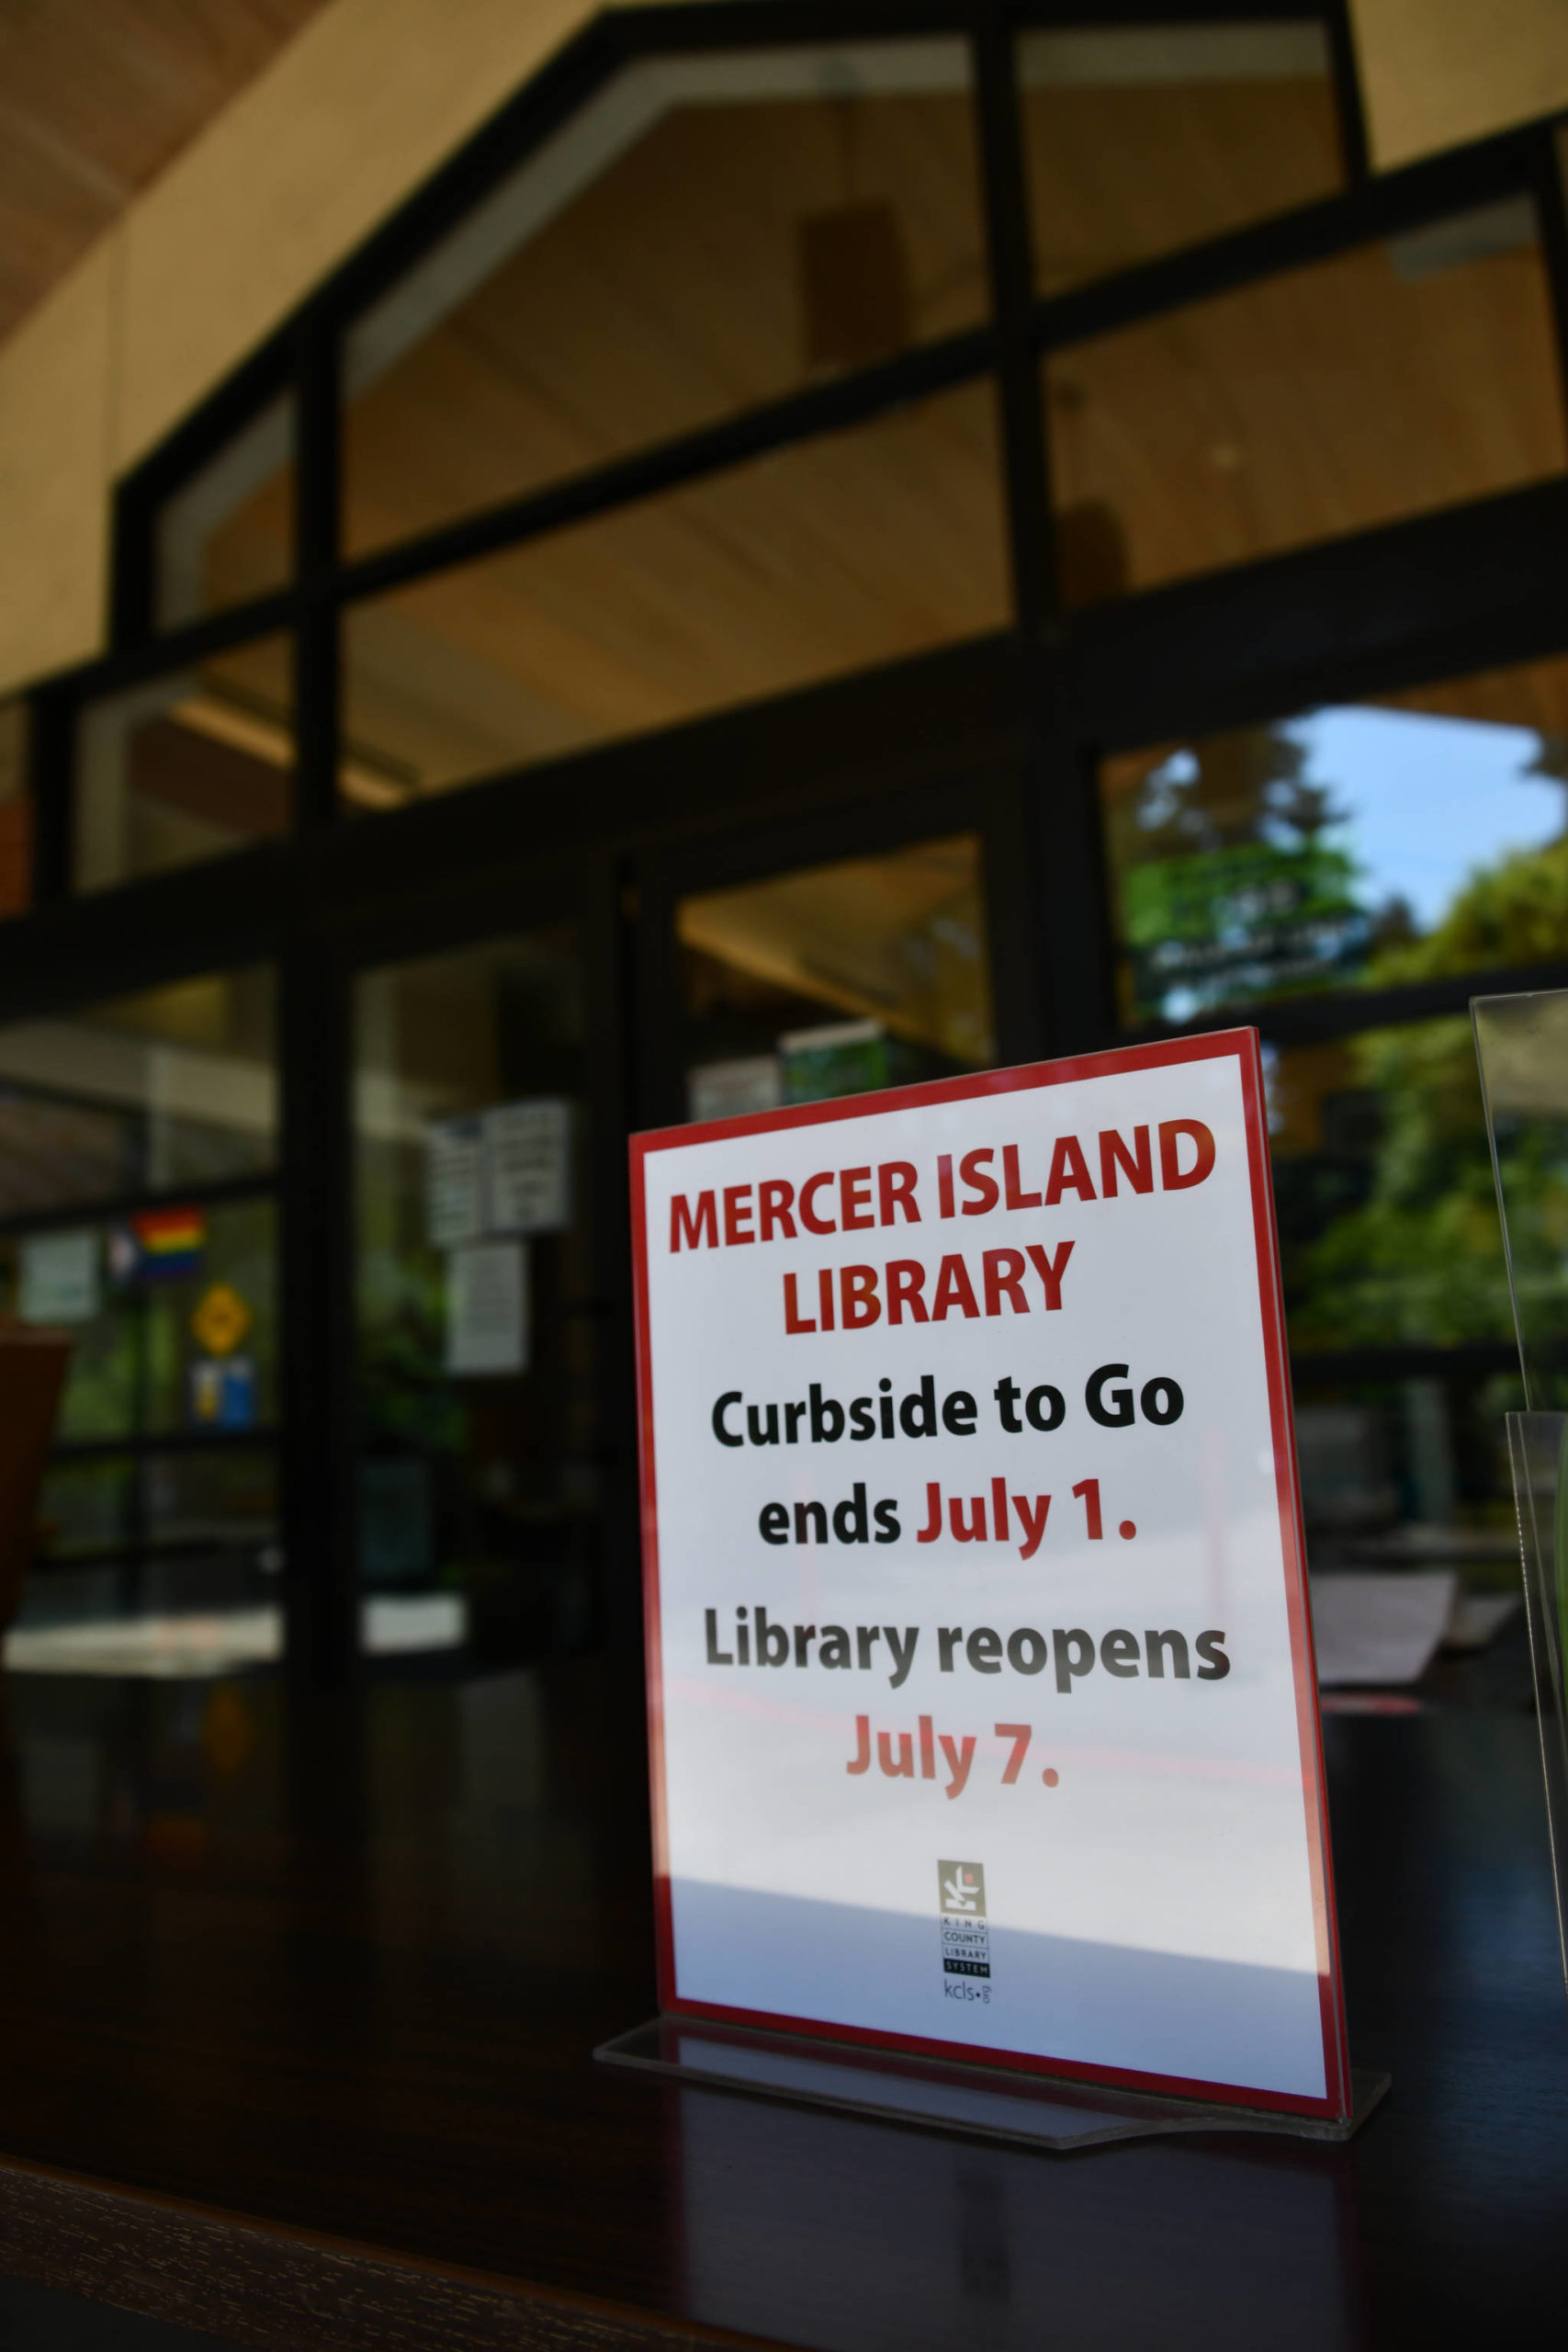 The Mercer Island Library, 4400 88th Ave. SE, will reopen from 1-8 p.m. on July 7. Andy Nystrom/ staff photo